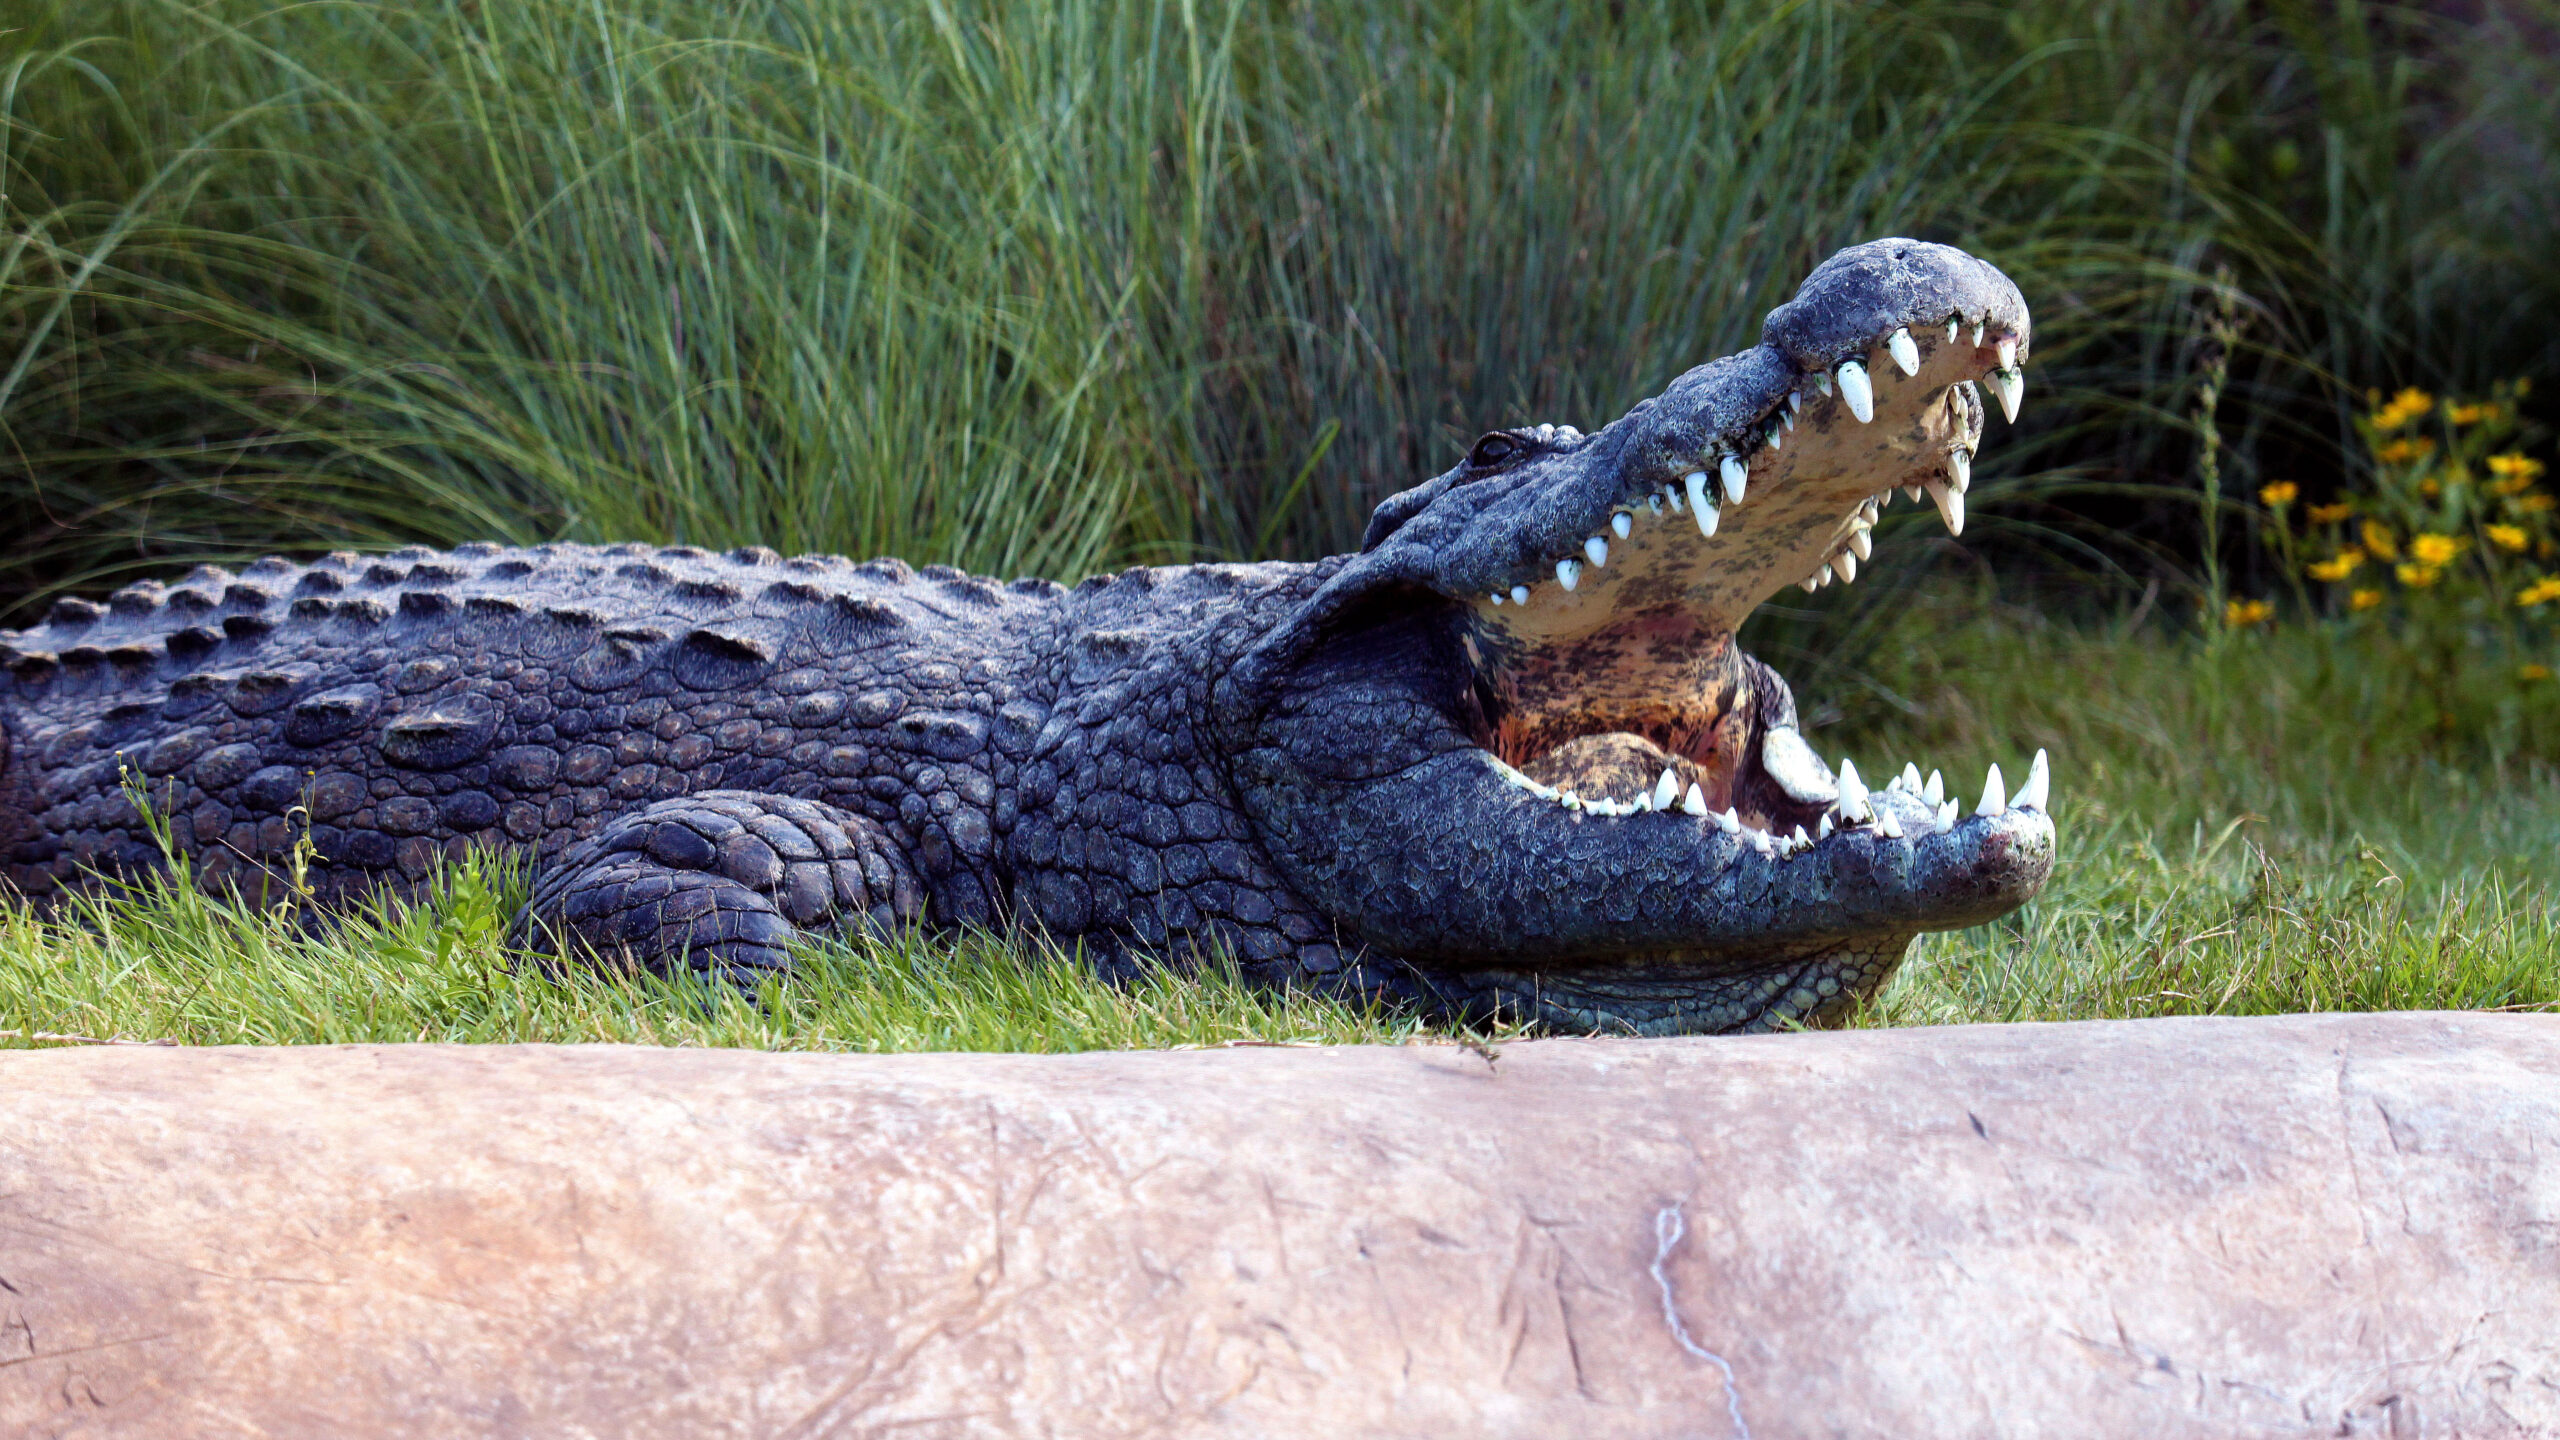 Florida man remains positive after losing arm in alligator attack.